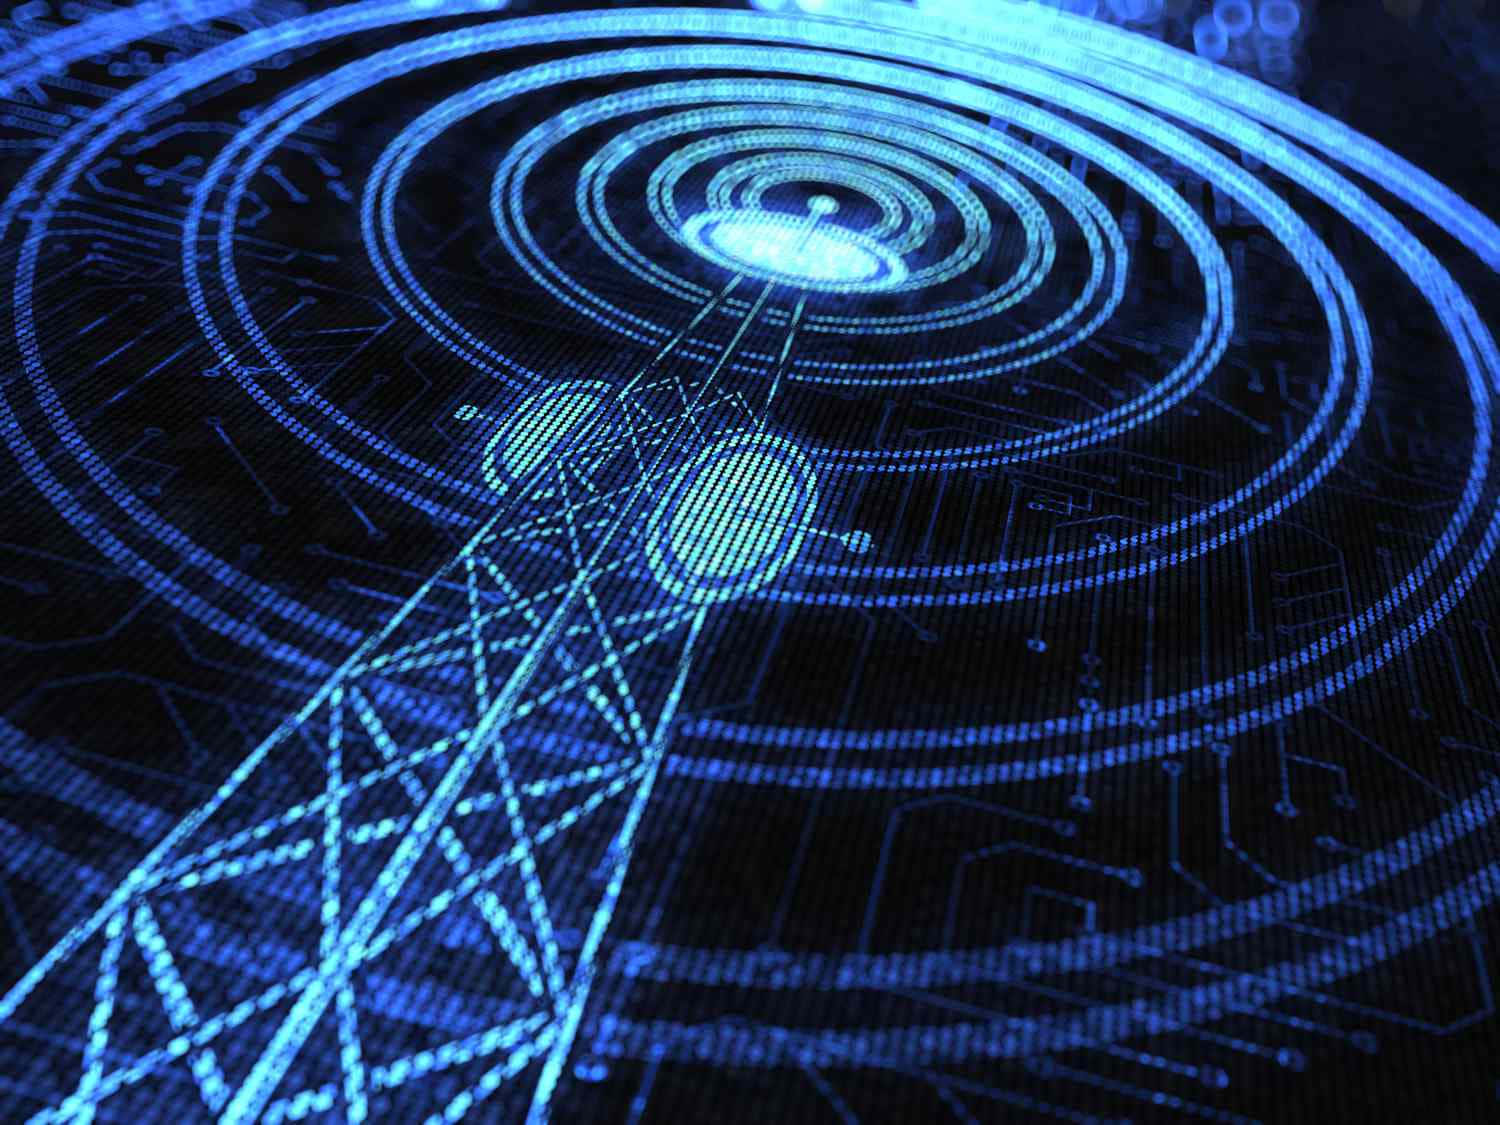 Broadcast Station Tower With Blue Radio Waves Wallpaper